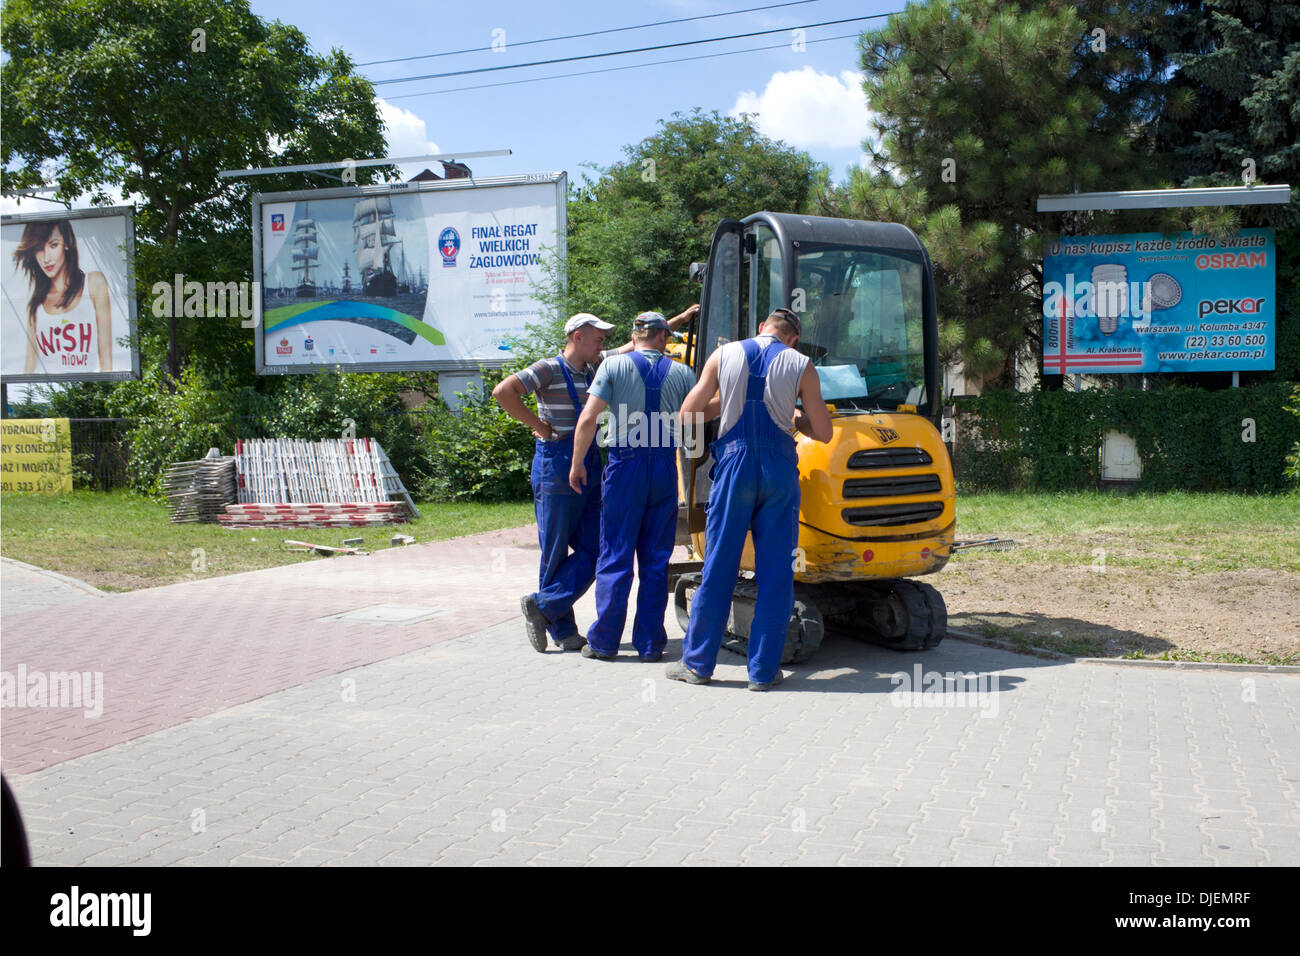 Men wearing blue suspender like trouser uniforms working with a tracked construction vehicle.  Warsaw Poland Stock Photo